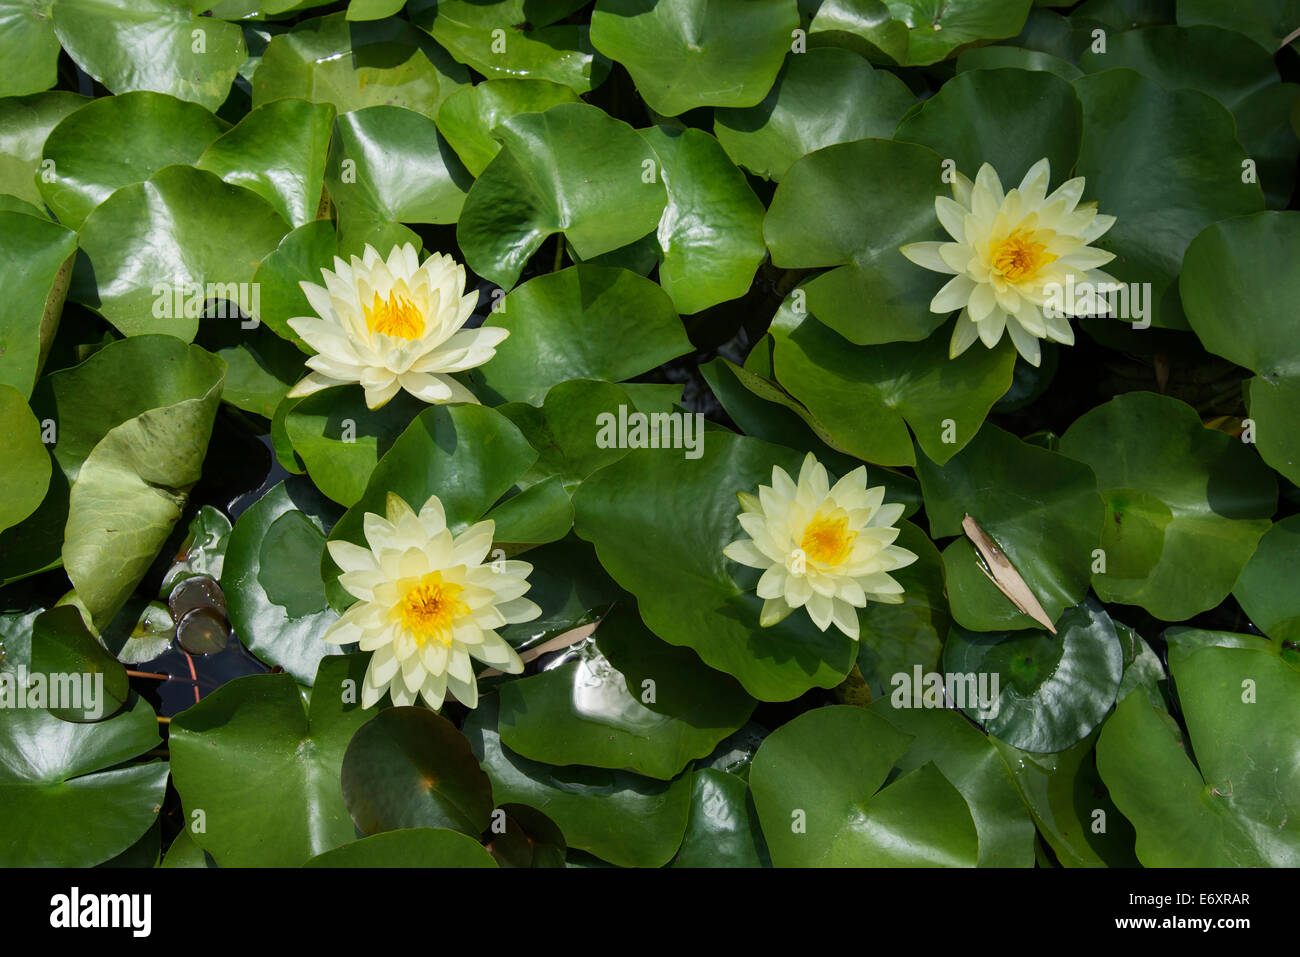 Lily flowers peek out from among lily pads. Stock Photo